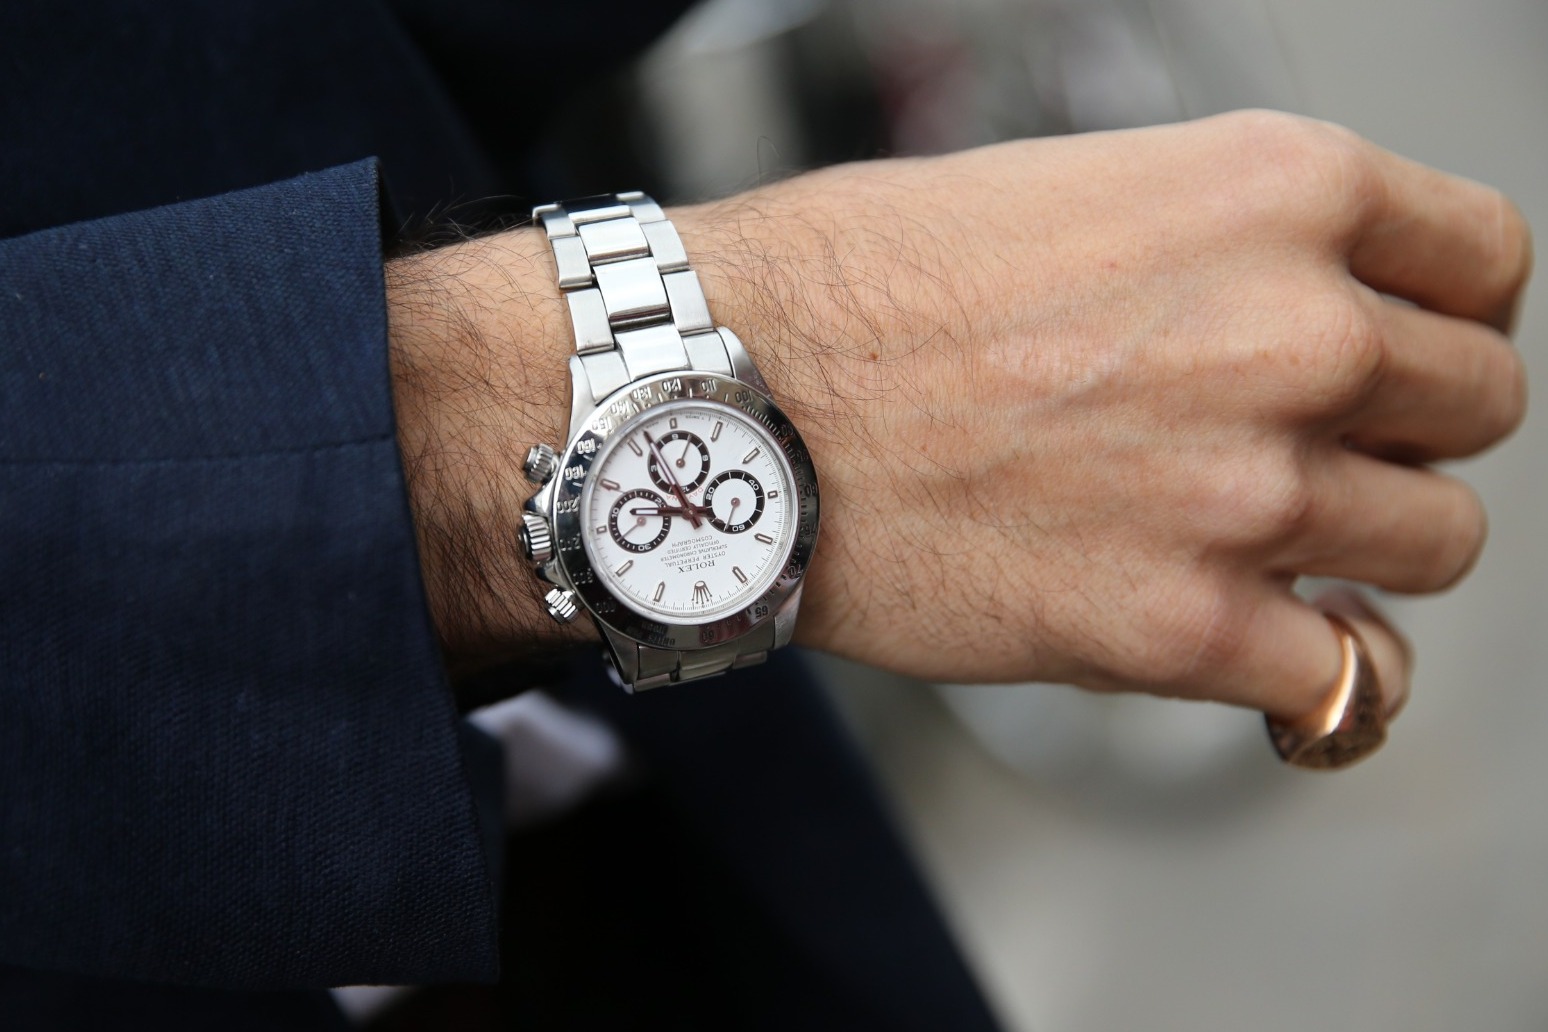 Met uses undercover ‘victim’ officers to clamp down on luxury watch thefts 